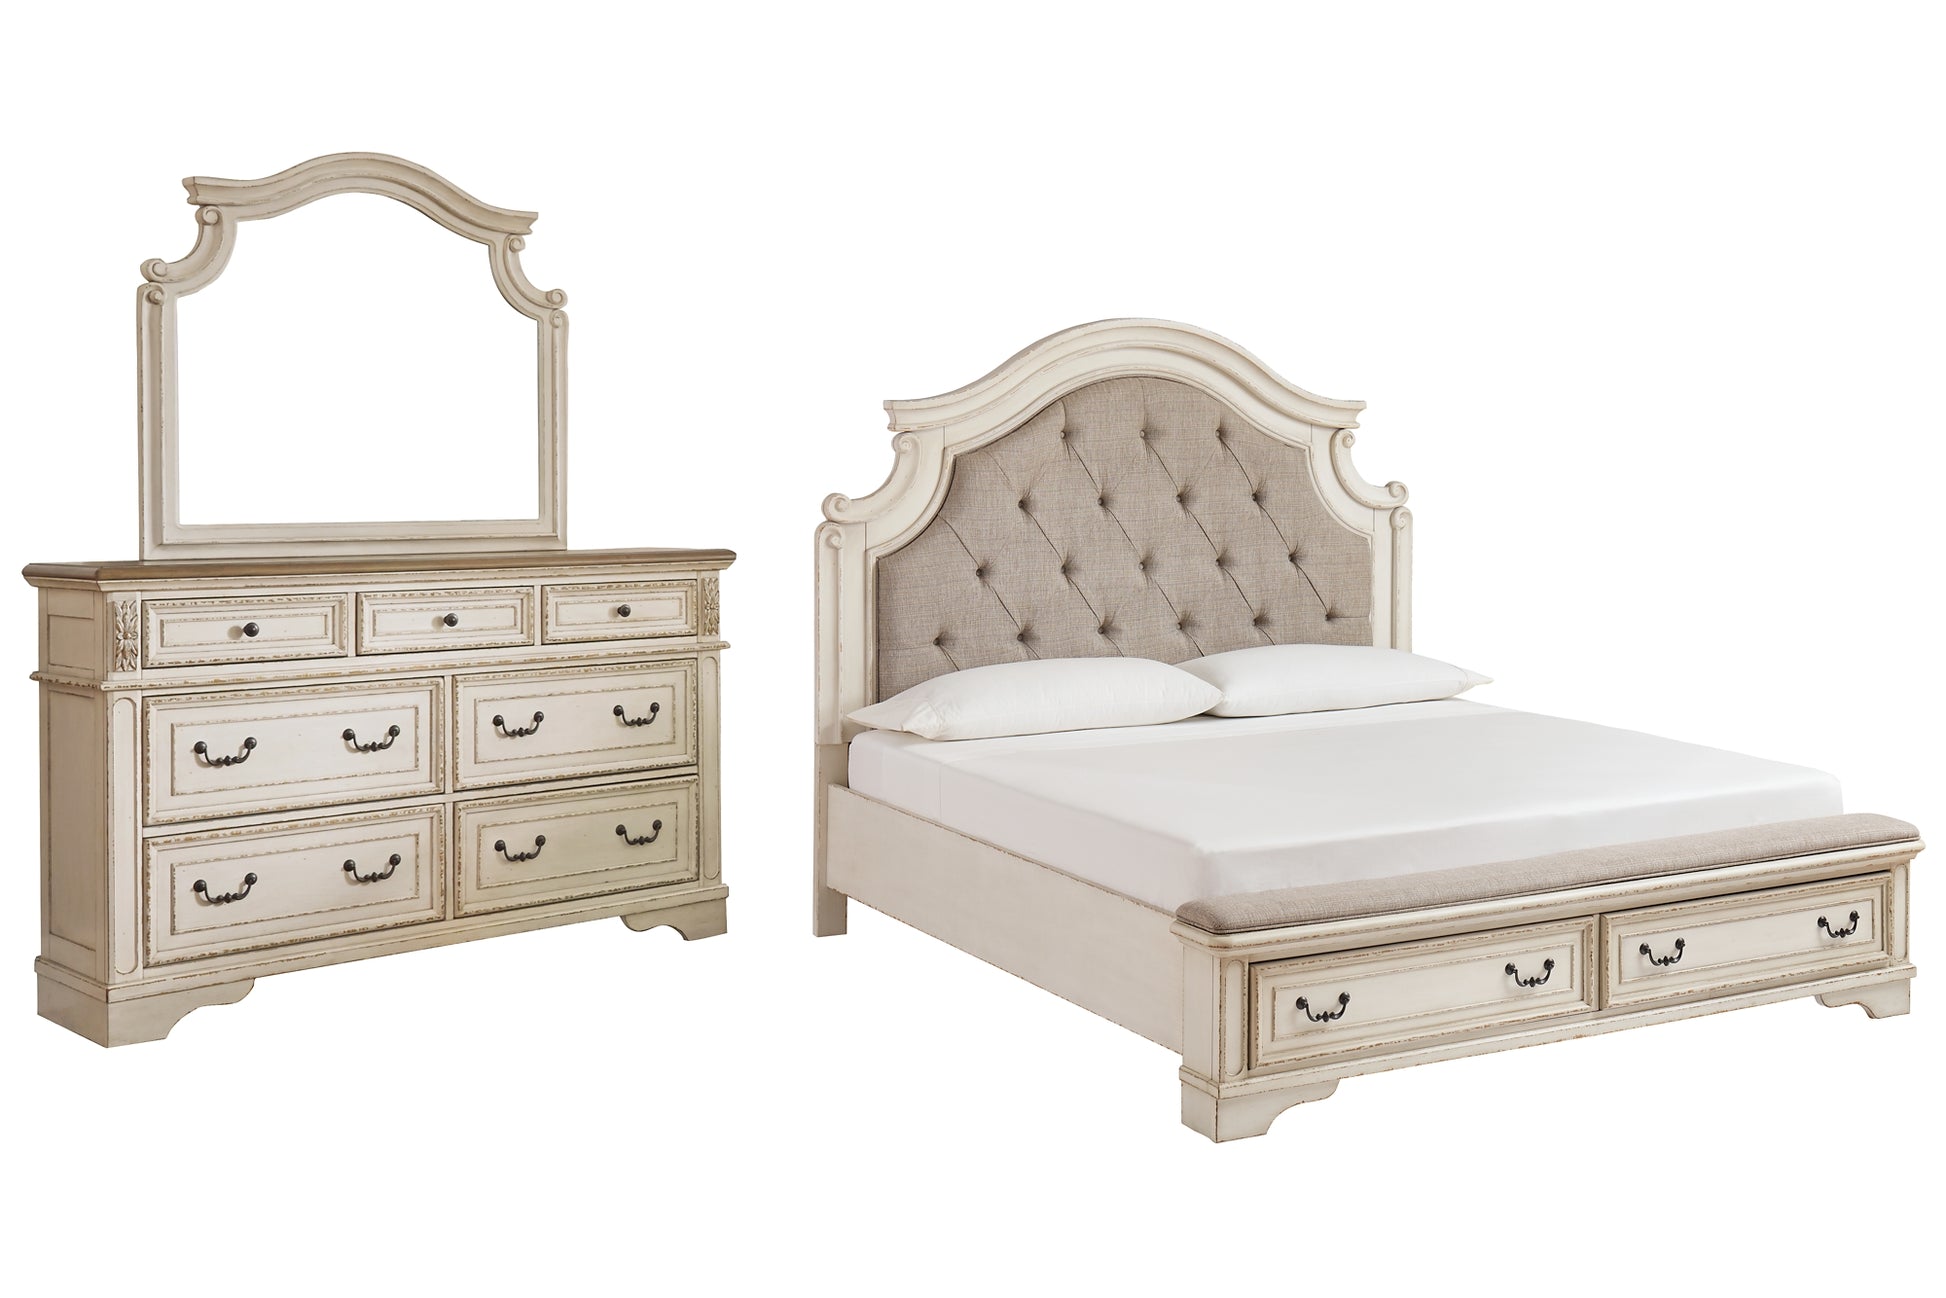 Realyn King Upholstered Bed with Mirrored Dresser Wilson Furniture (OH)  in Bridgeport, Ohio. Serving Bridgeport, Yorkville, Bellaire, & Avondale